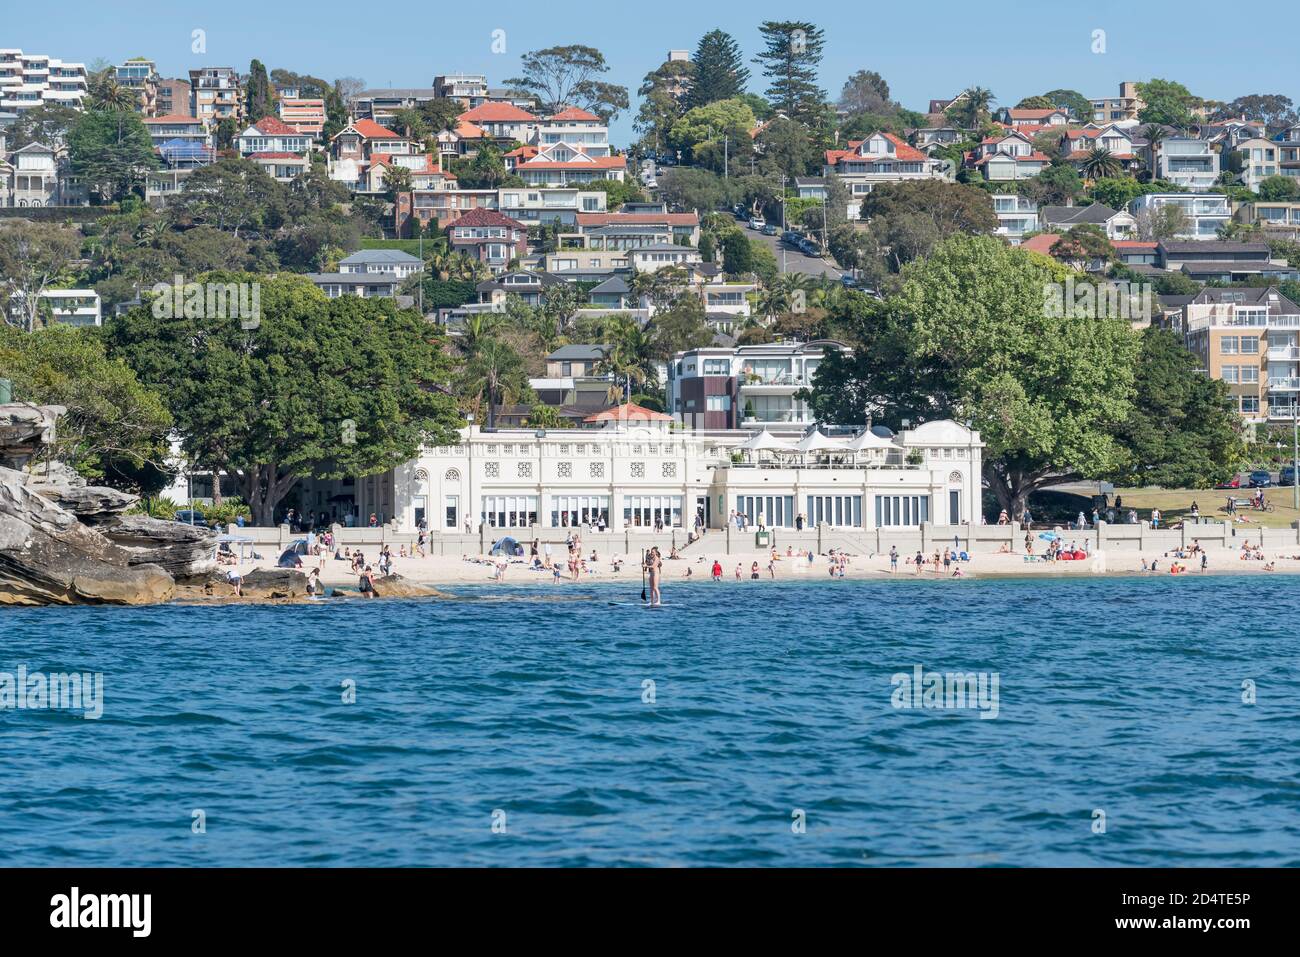 The 1928-29 constructed 'Spanish Mission' style, Bathers Pavilion at Balmoral Beach, Mosman, Sydney, Australia on a sunny spring morning from a boat Stock Photo